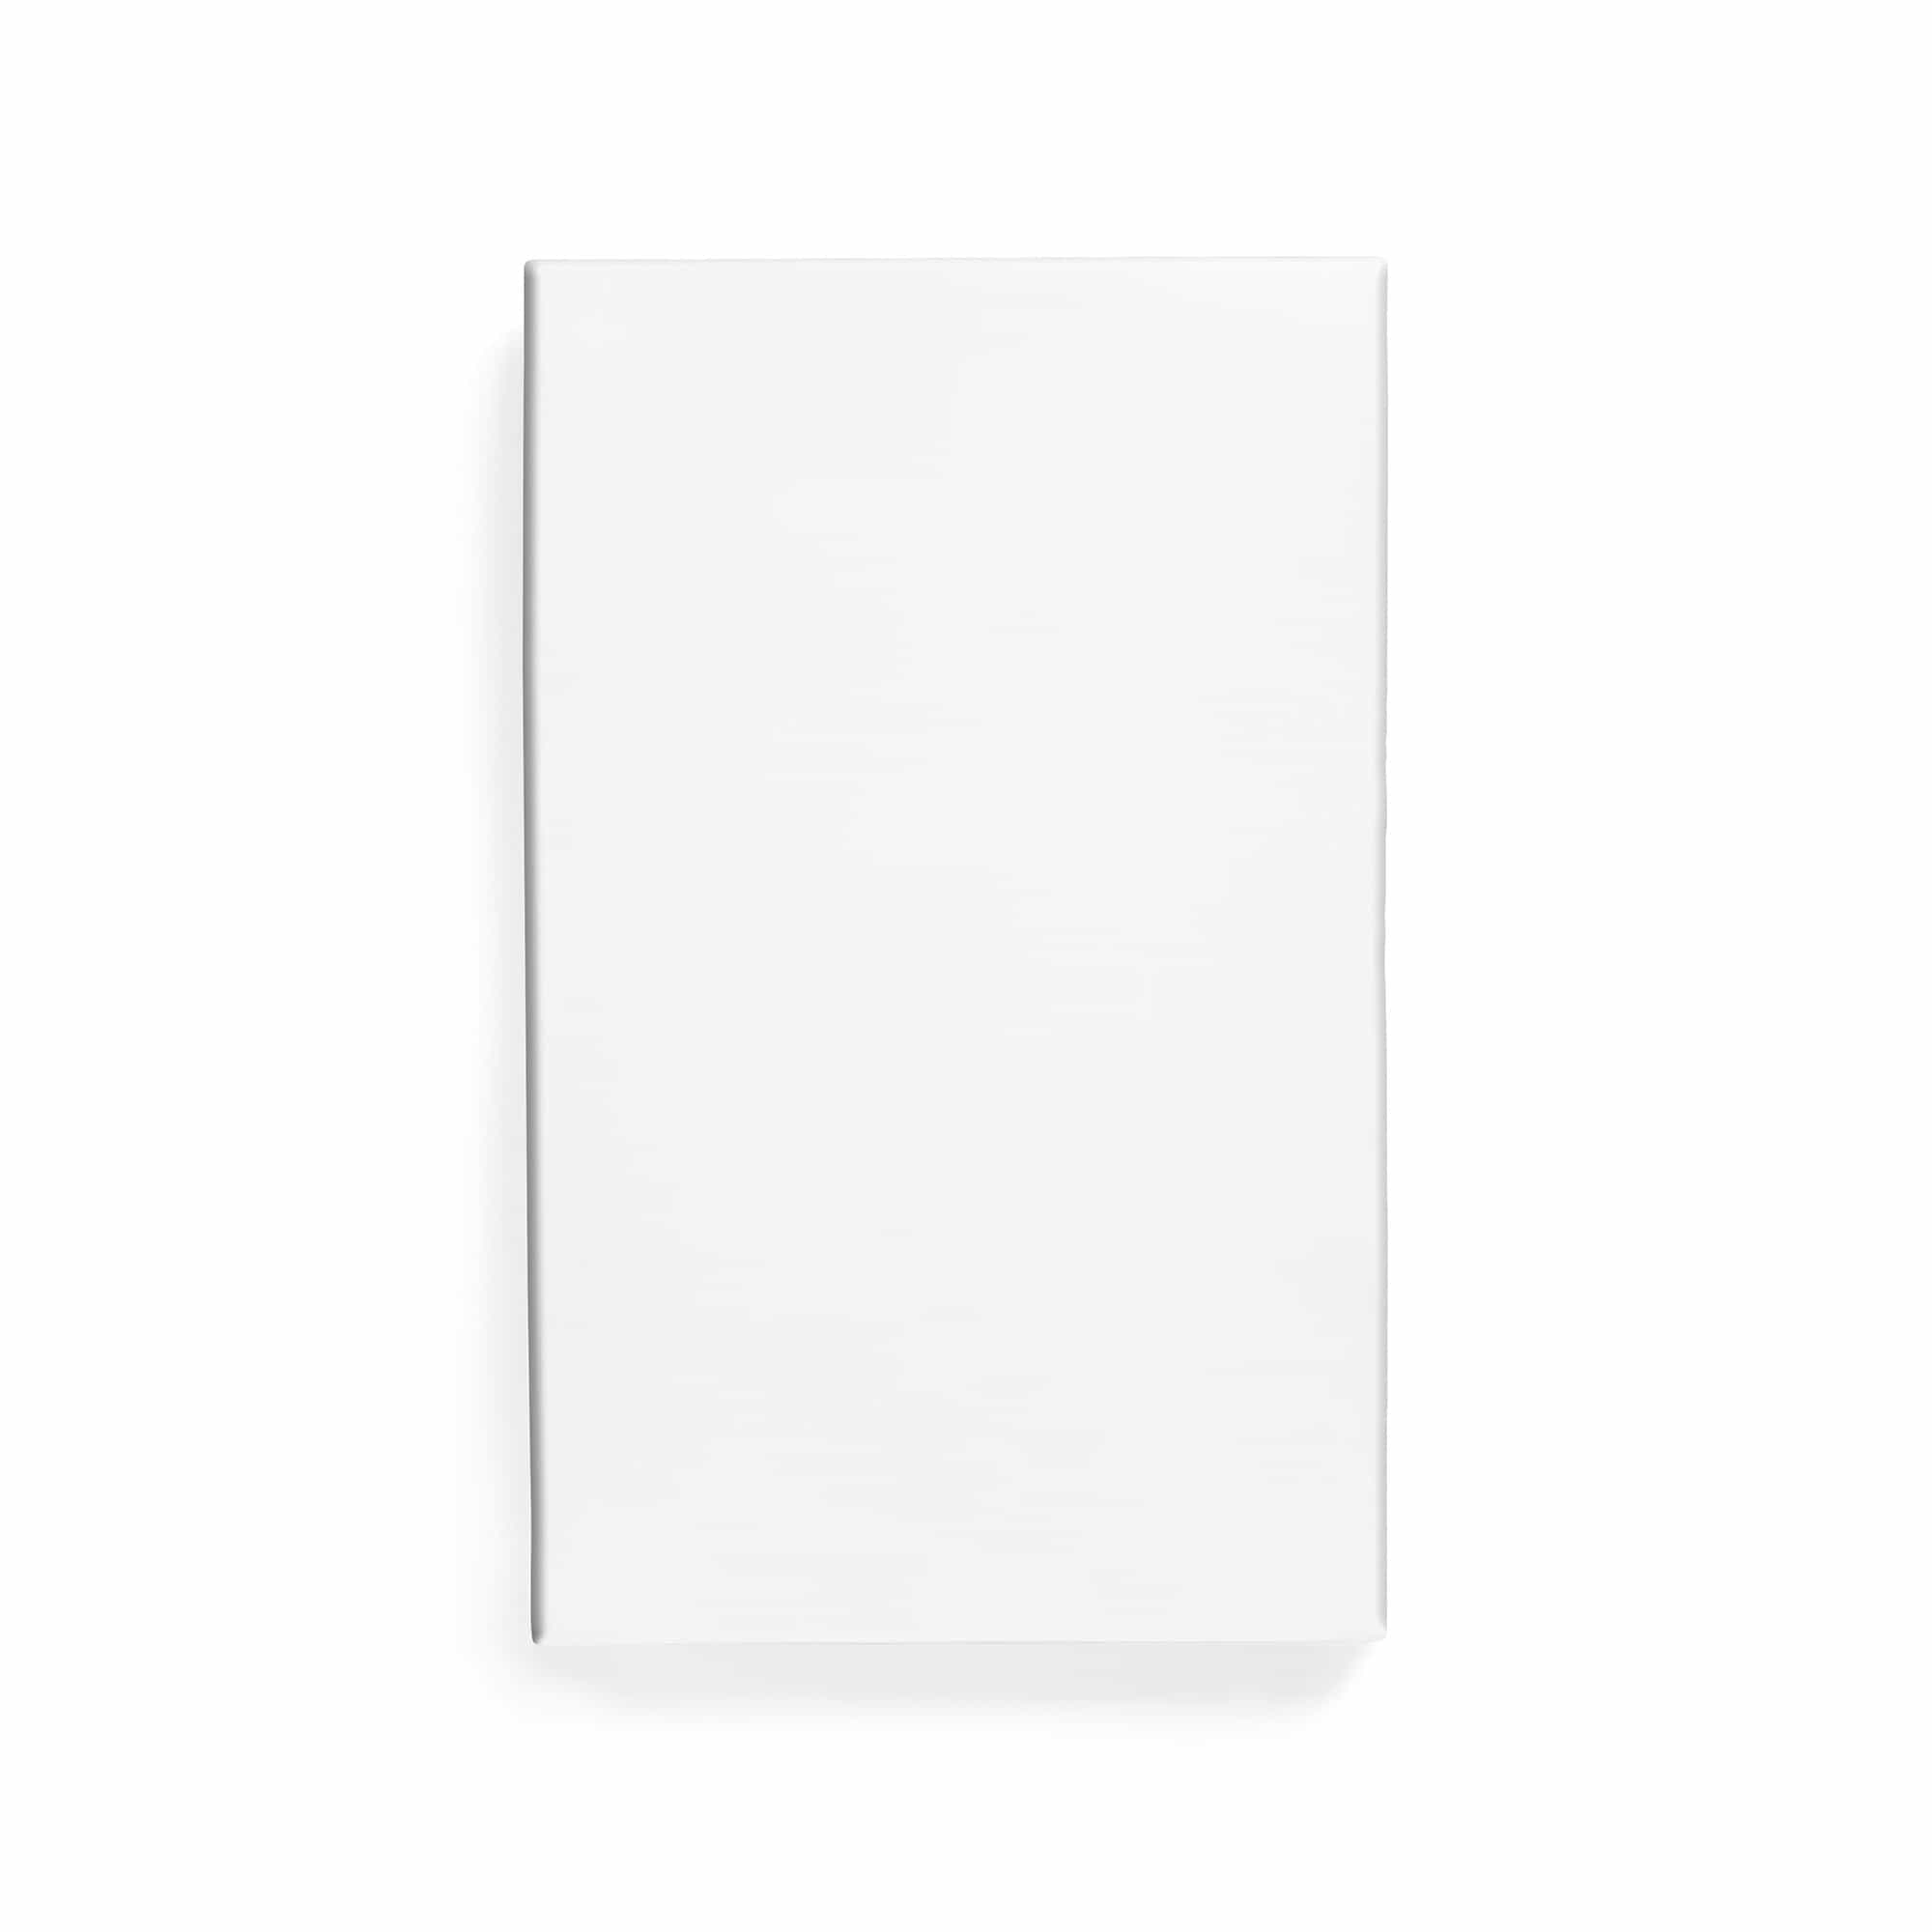 Standard Fitted Sheet White